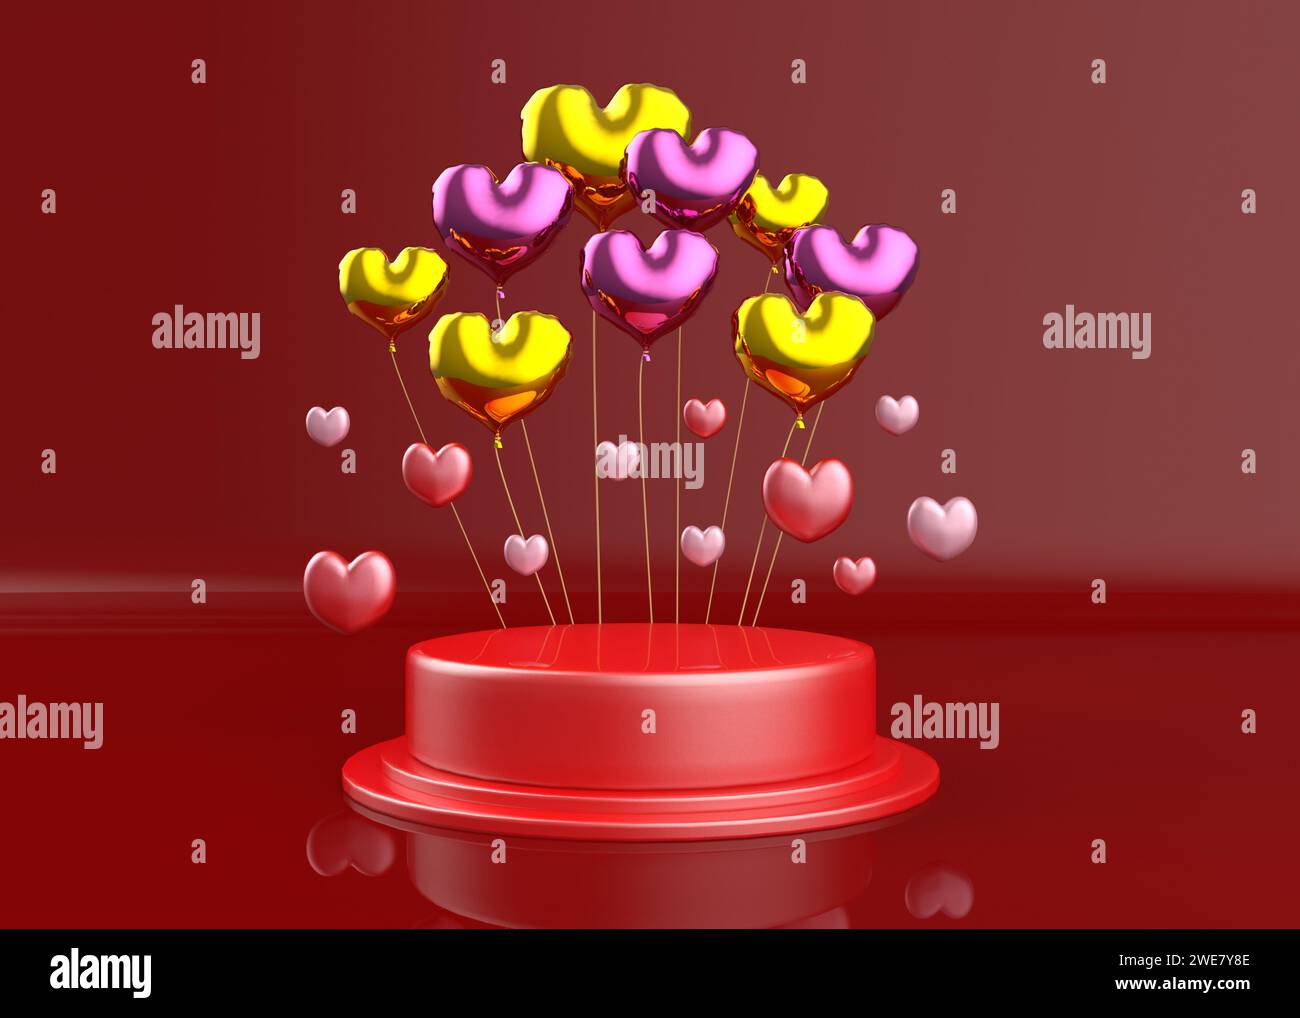 Decorative red pedestal with gold and pink heart shaped balloons, 3d Illustration. Stock Photo